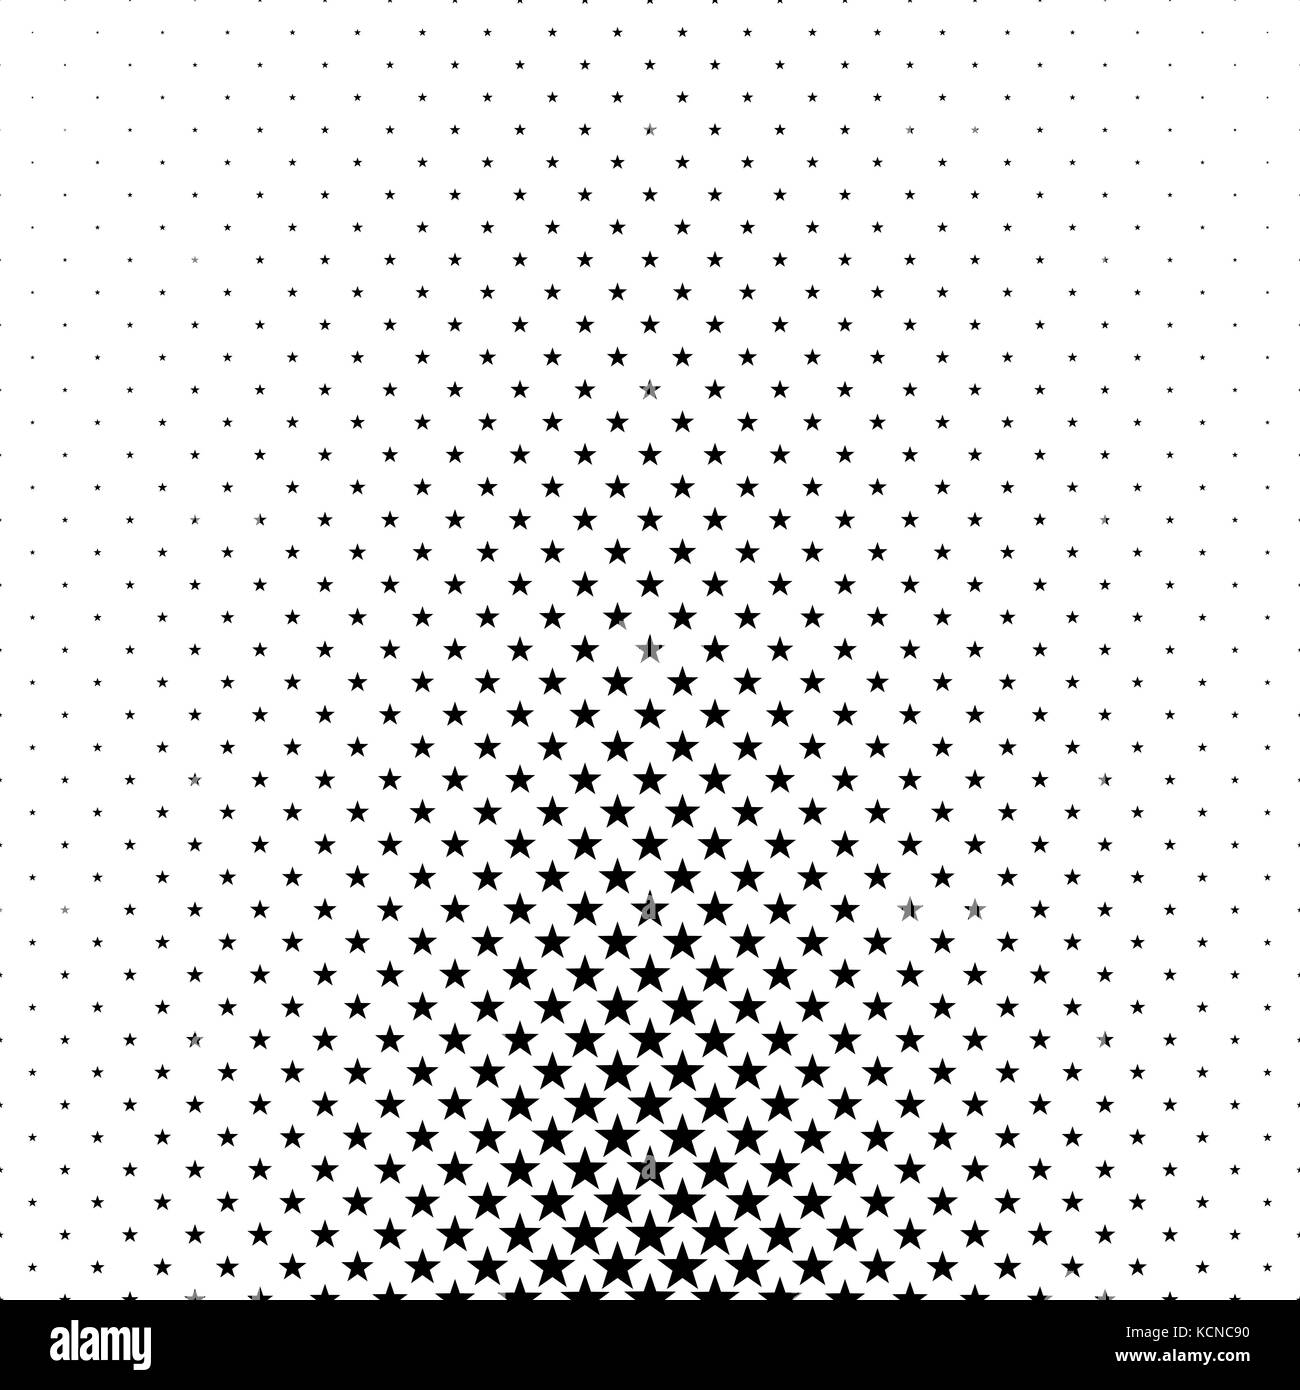 Monochrome star pattern - abstract vector background graphic Stock Vector